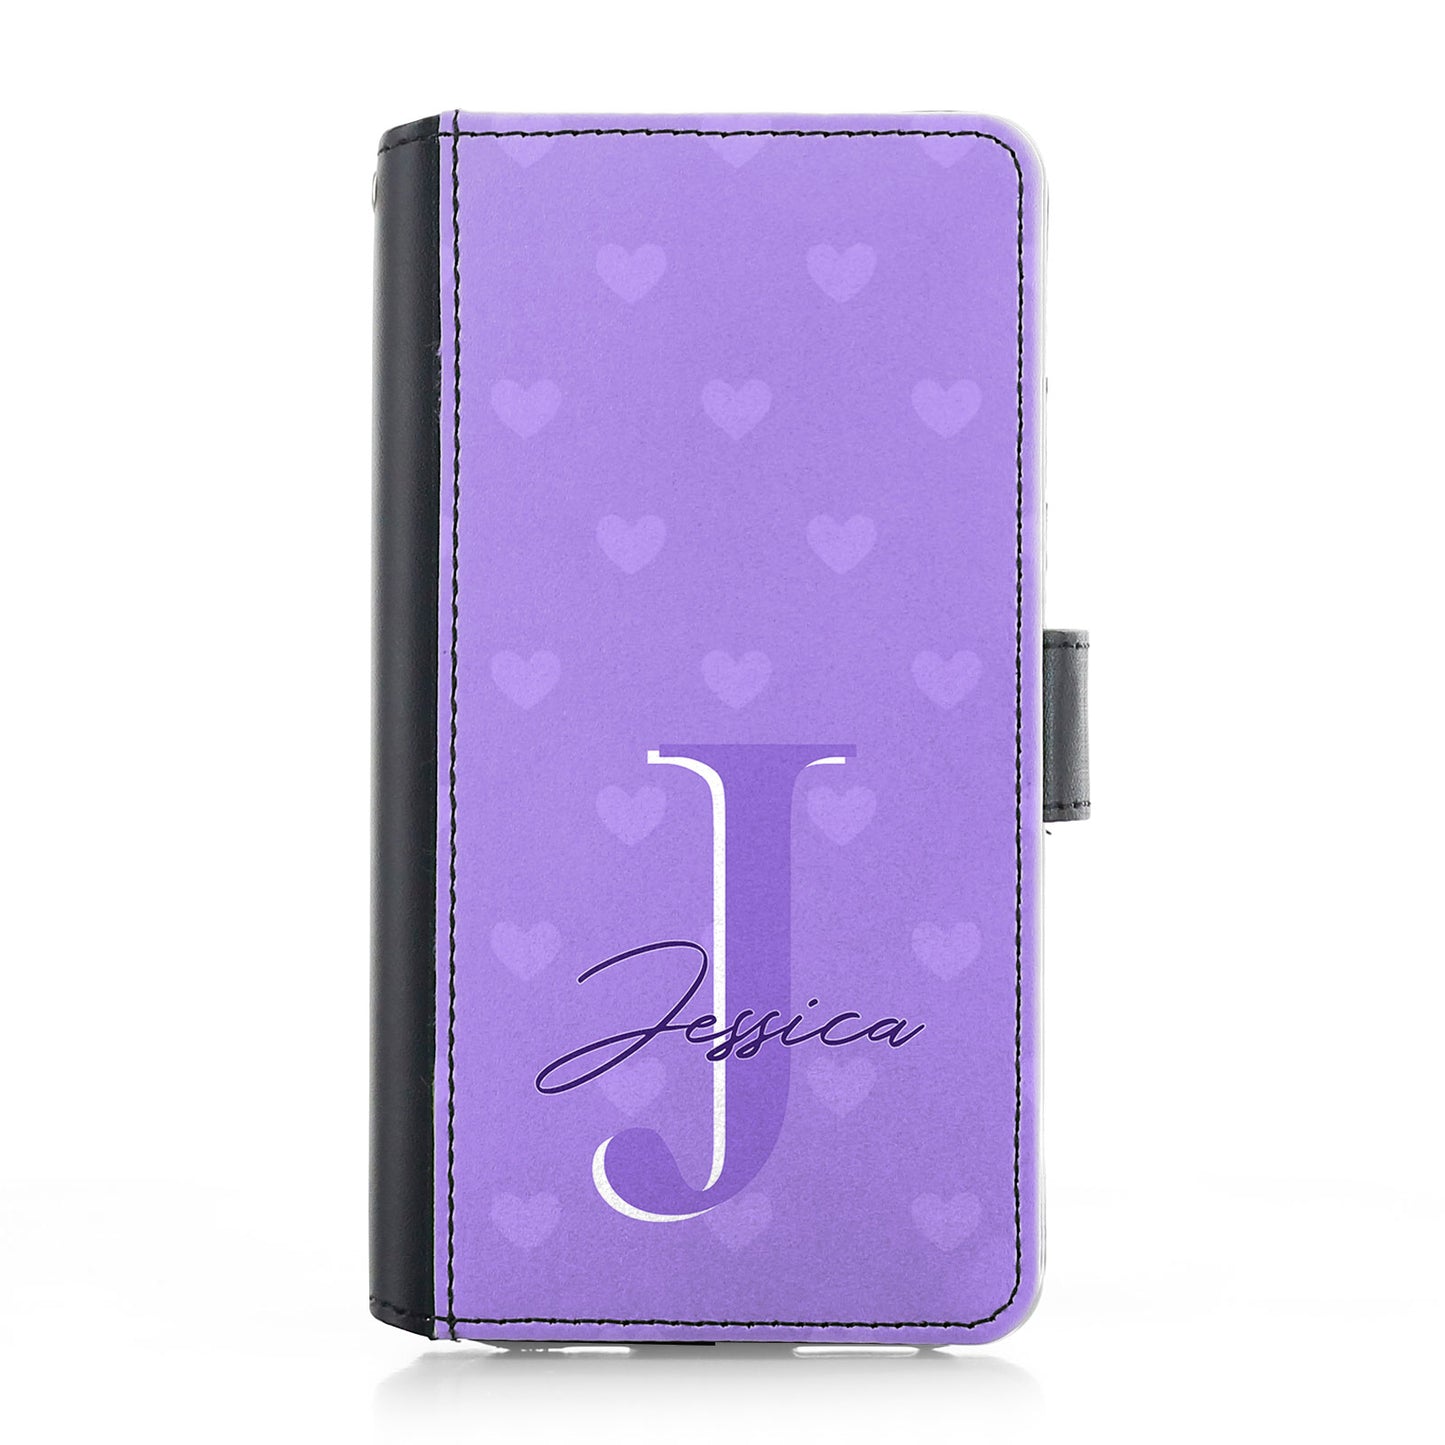 Personalised iPhone Leather Case - Violet Heart Monogram and Name